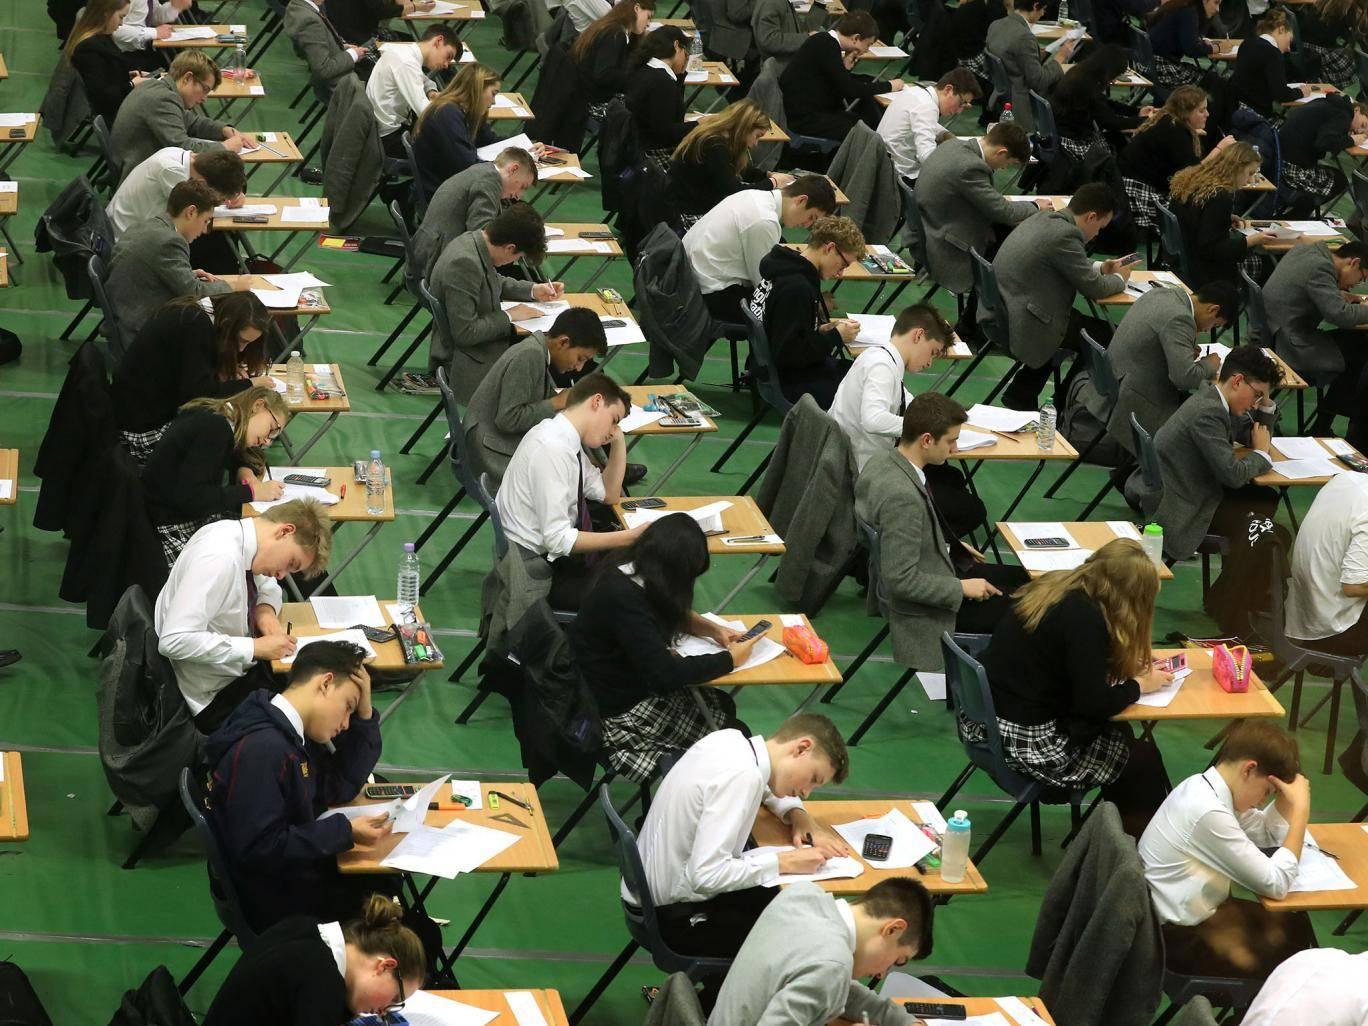 The number of penalties given to students for cheating in their GCSE and A-level exams rose by a quarter last year